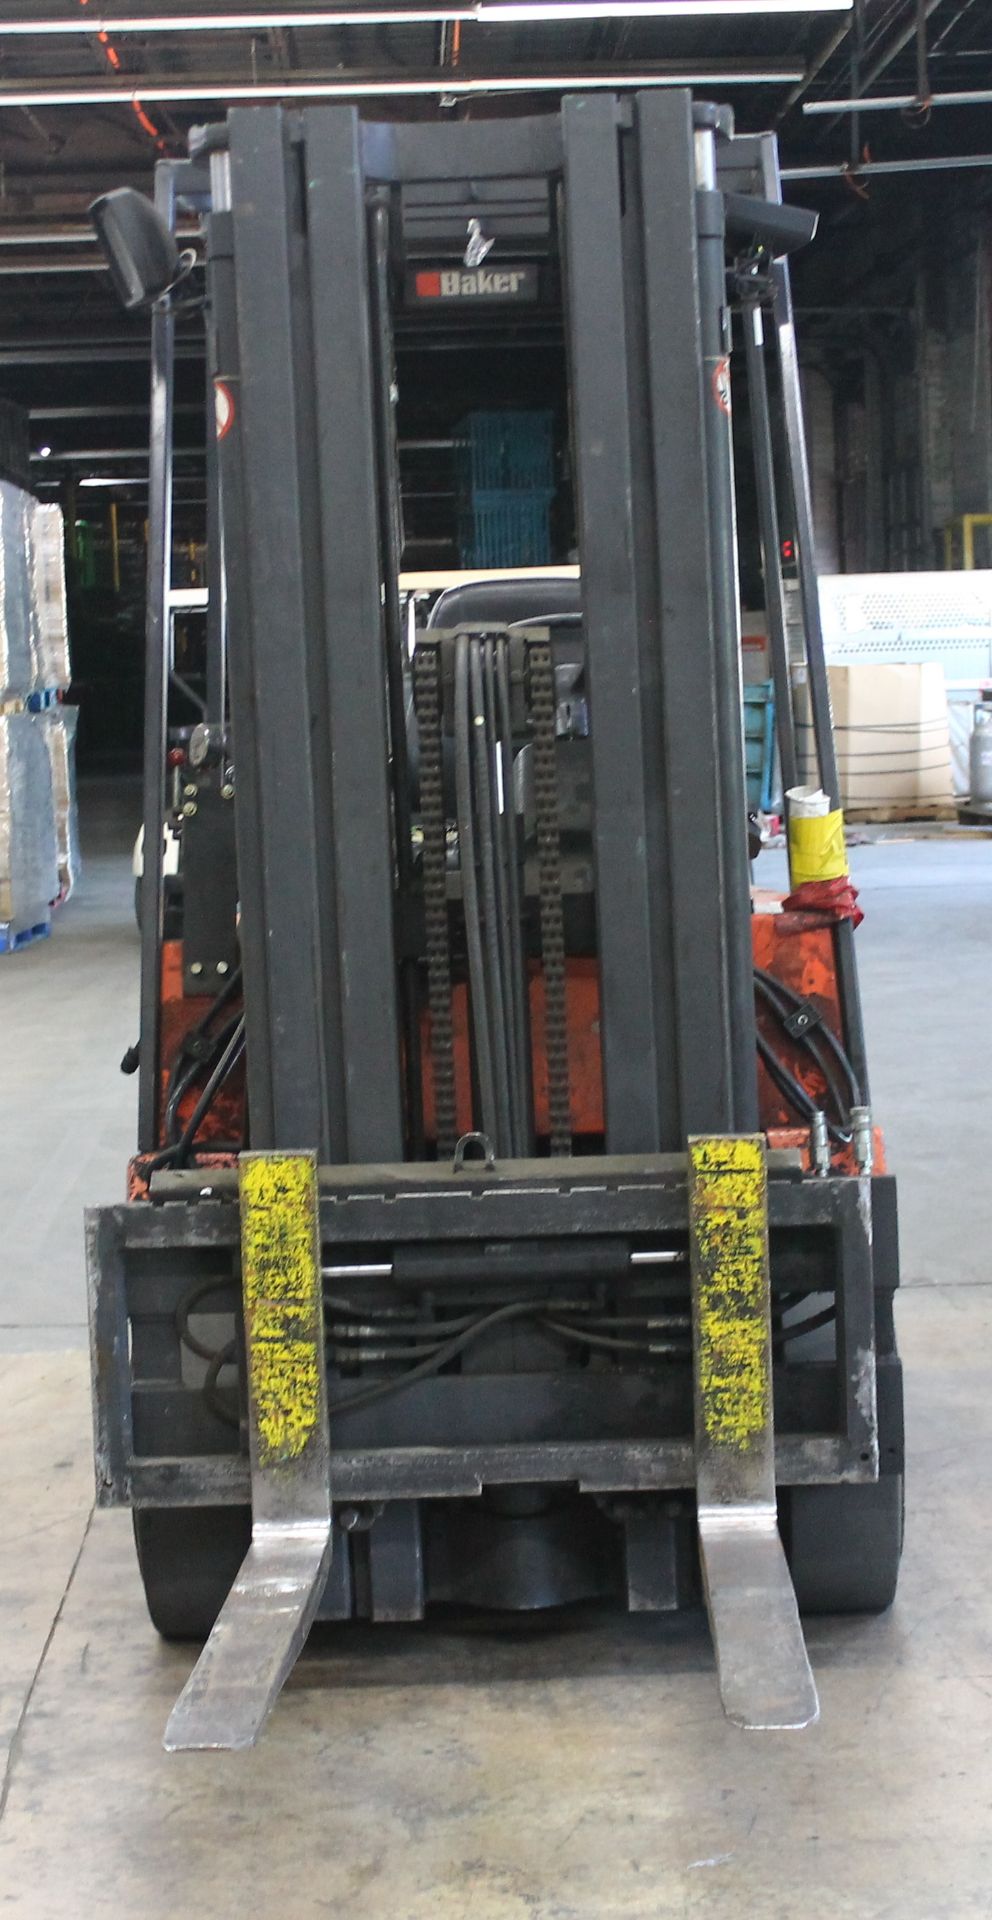 BAKER 4000 LBS CAPACITY ELECTRIC FORKLIFT - Image 3 of 5